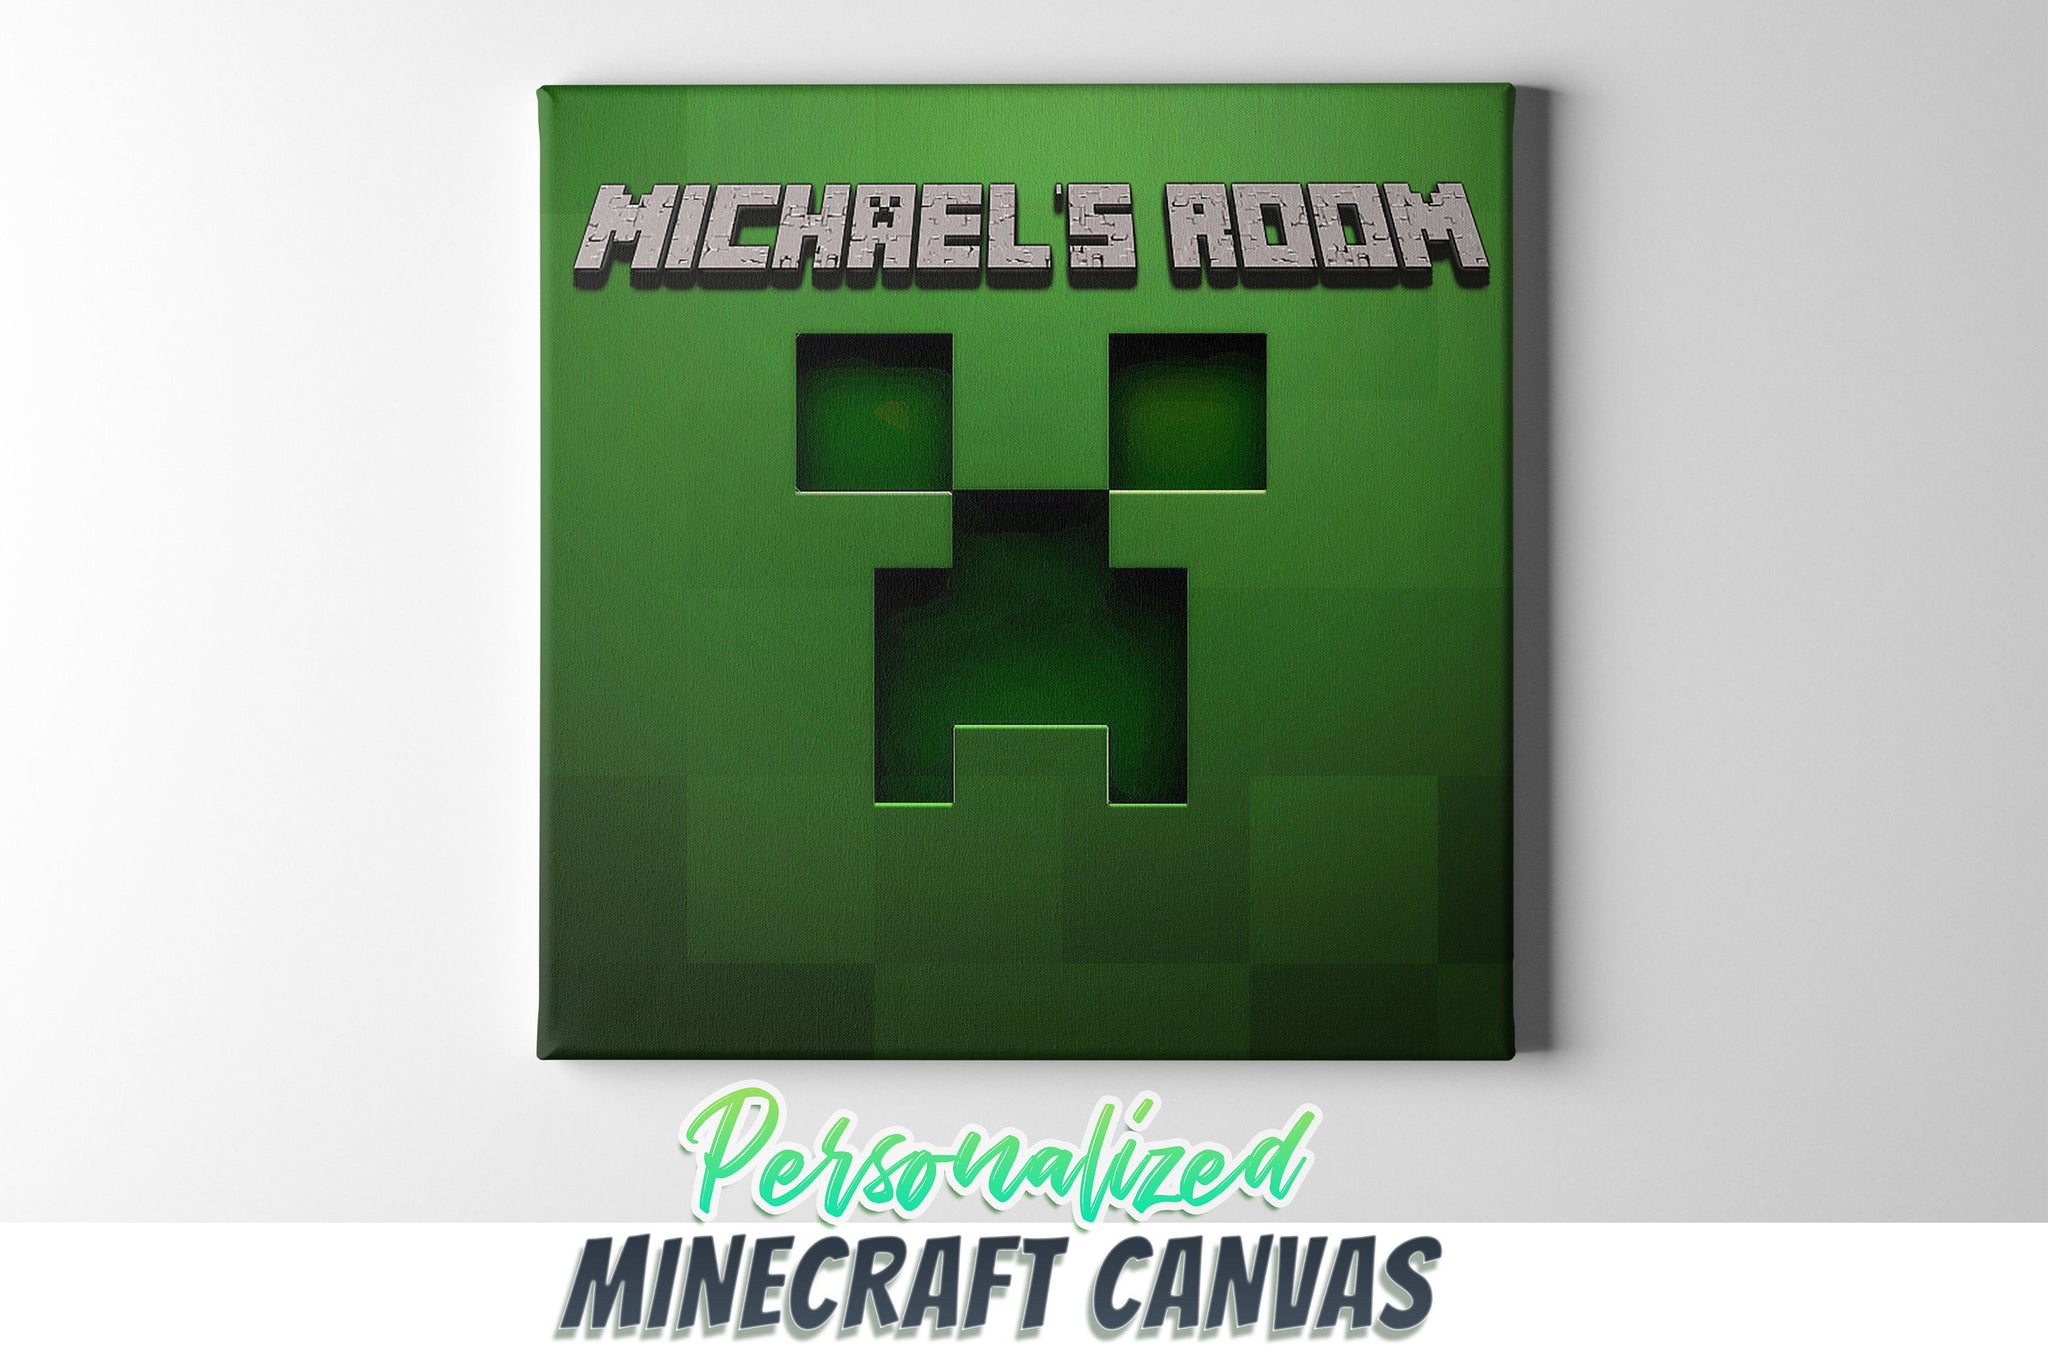 Minecraft Canvas Wall Art, Personalized Minecraft Canvas Wall Art, Minecraft Wall Decor, Minecraft Canvas Print Framed & Ready to Hang